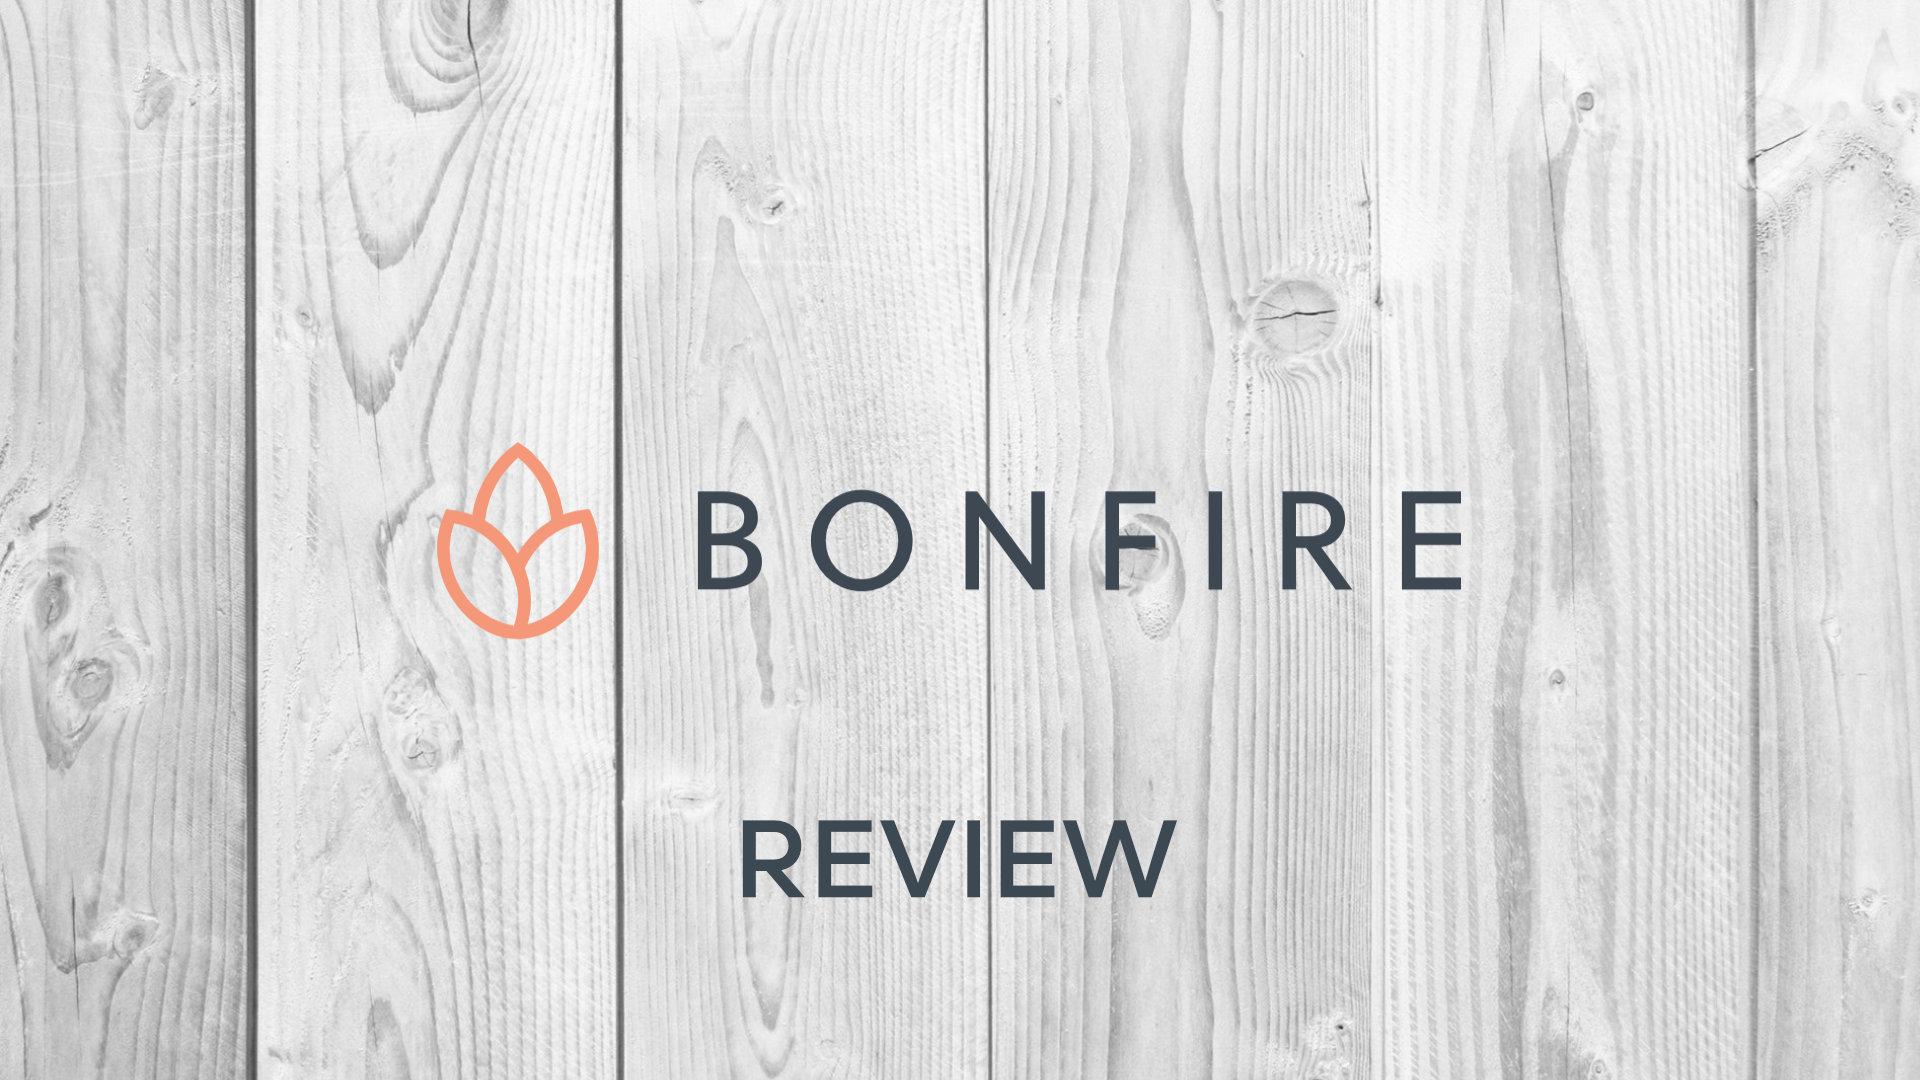 Bonfire Review: Is It Worth Paying Extra?